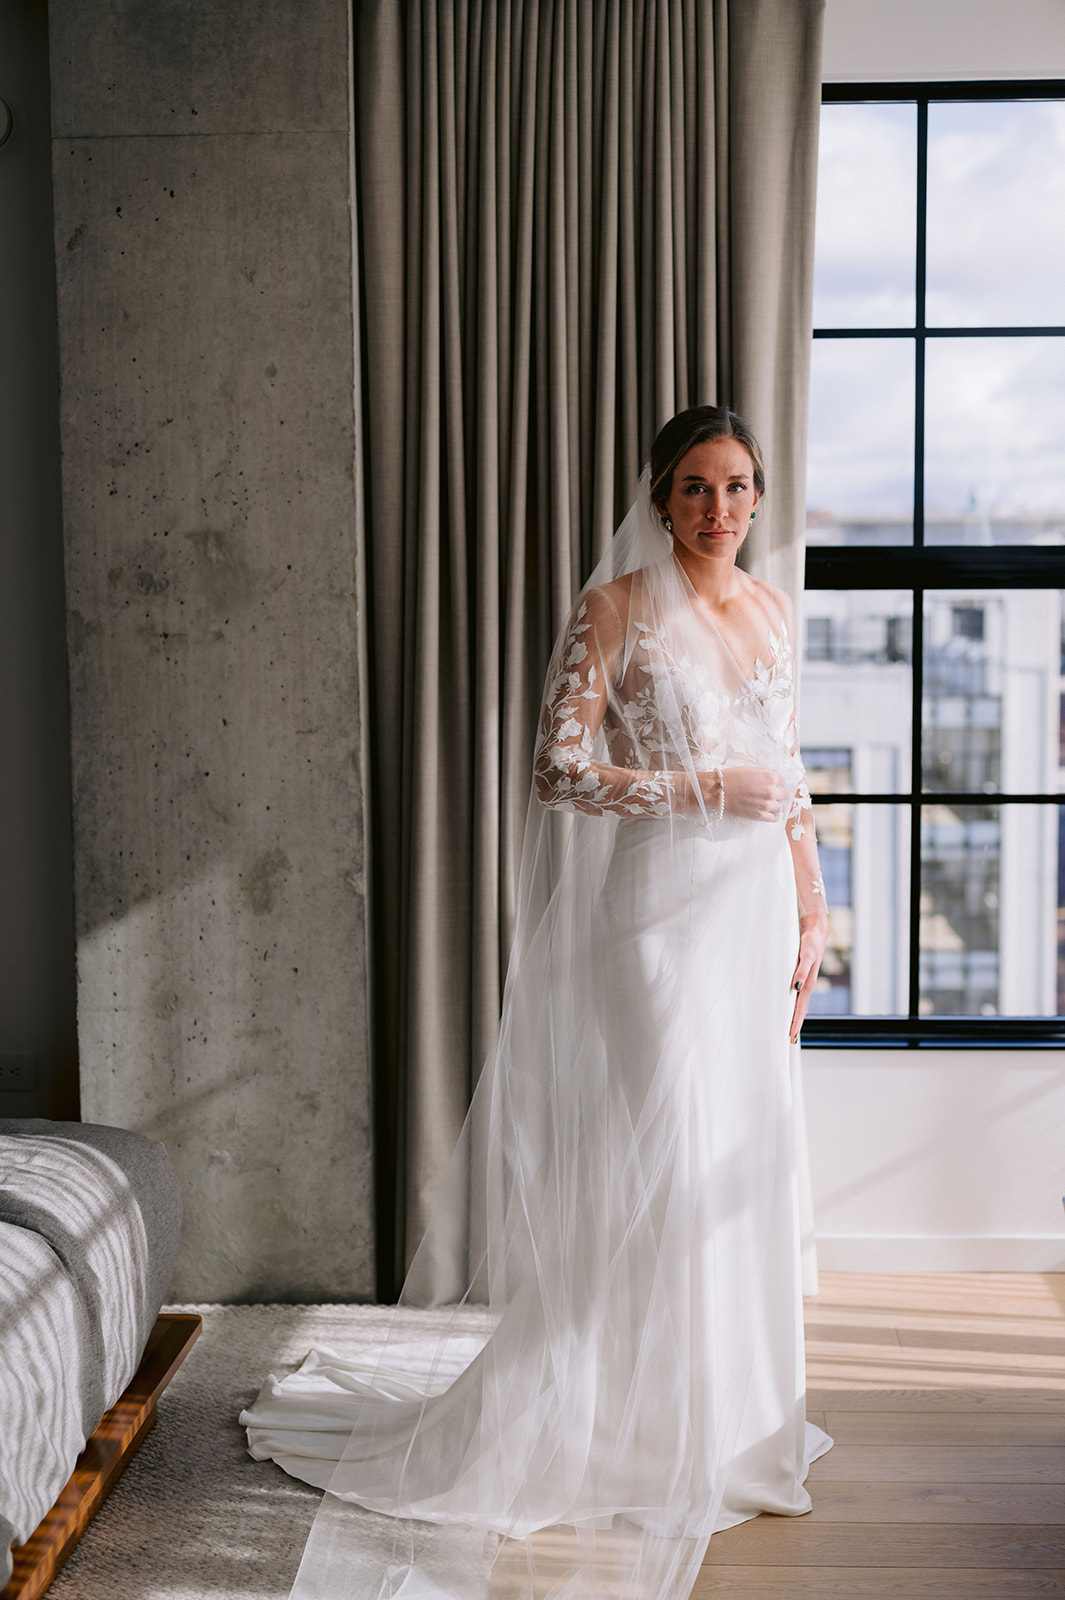 Stunning bride looks enchantingly at the camera in her wedding dress, captured by Mary Shelton Media